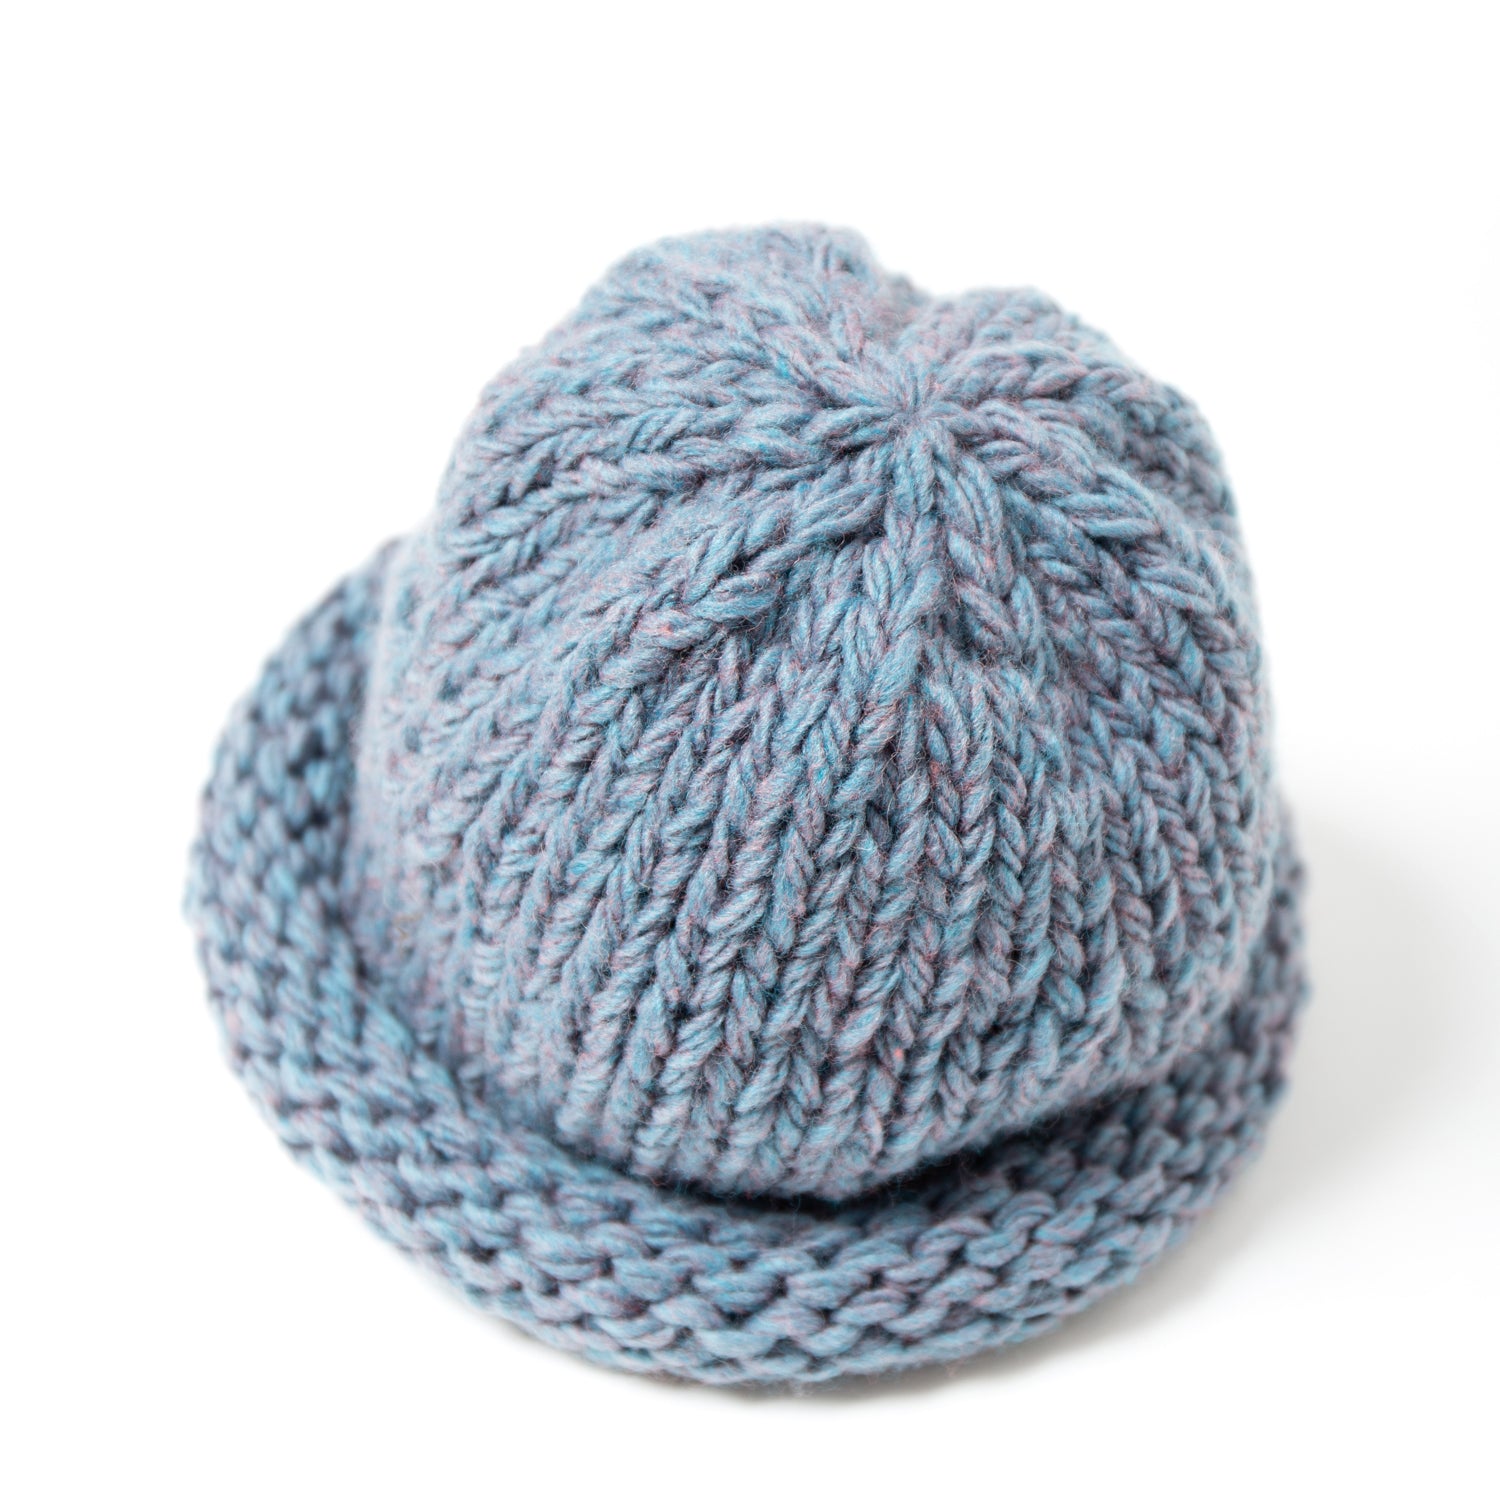 No:IA-24-106_LIGHT BLUE | Name:Roll Knit Cap | Color:Light Blue【INDIETRO ASSOCIATION】【入荷予定アイテム・入荷連絡可能】